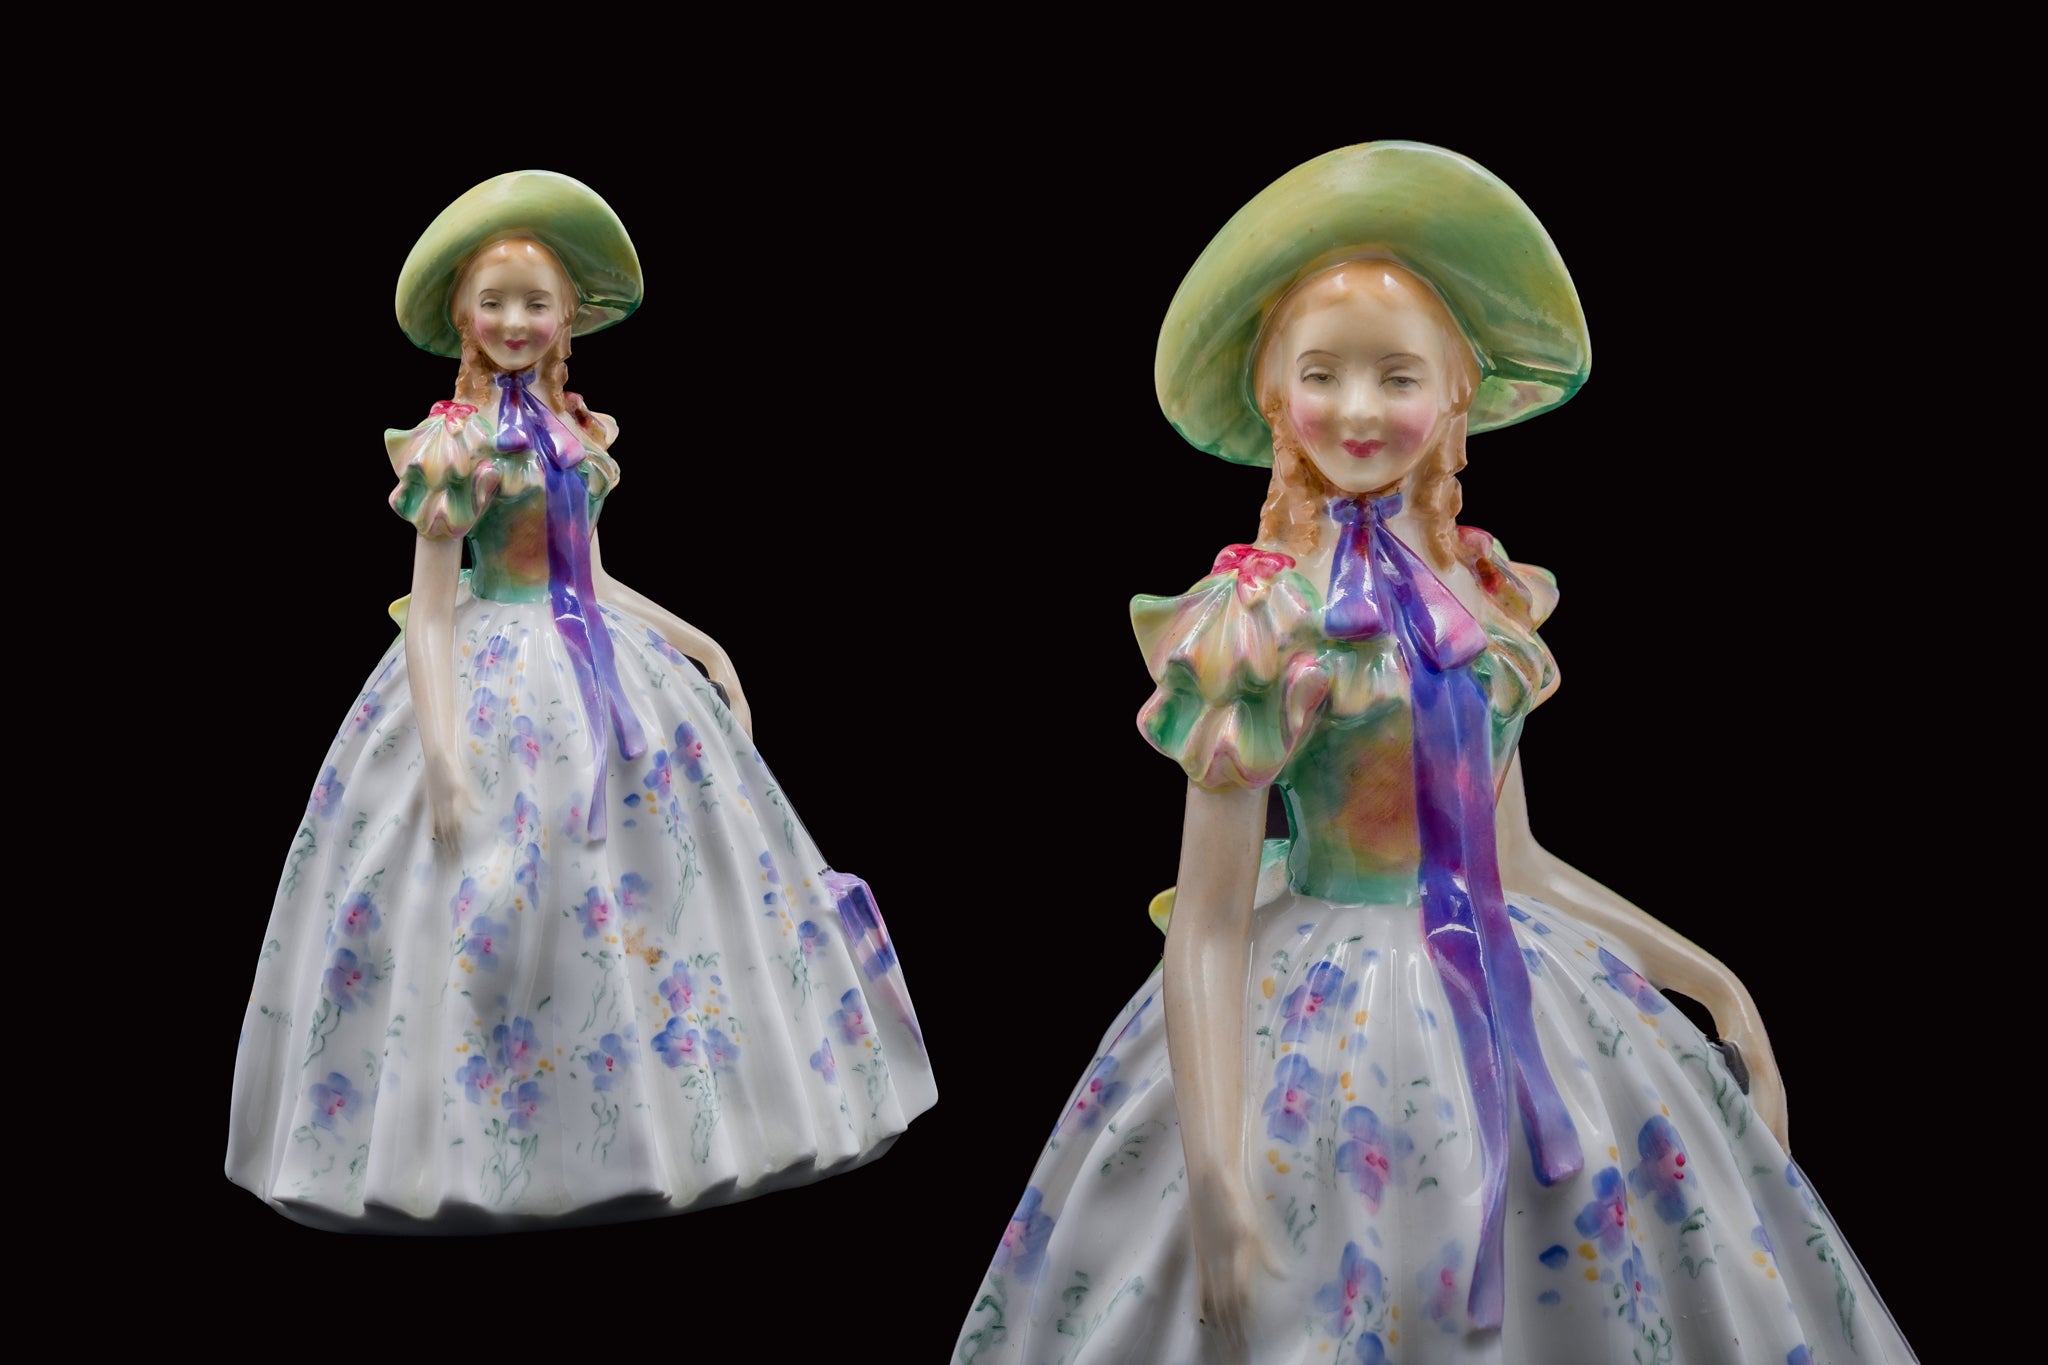 Royal Doulton Figurine "Easter Day Parade" RN842489.